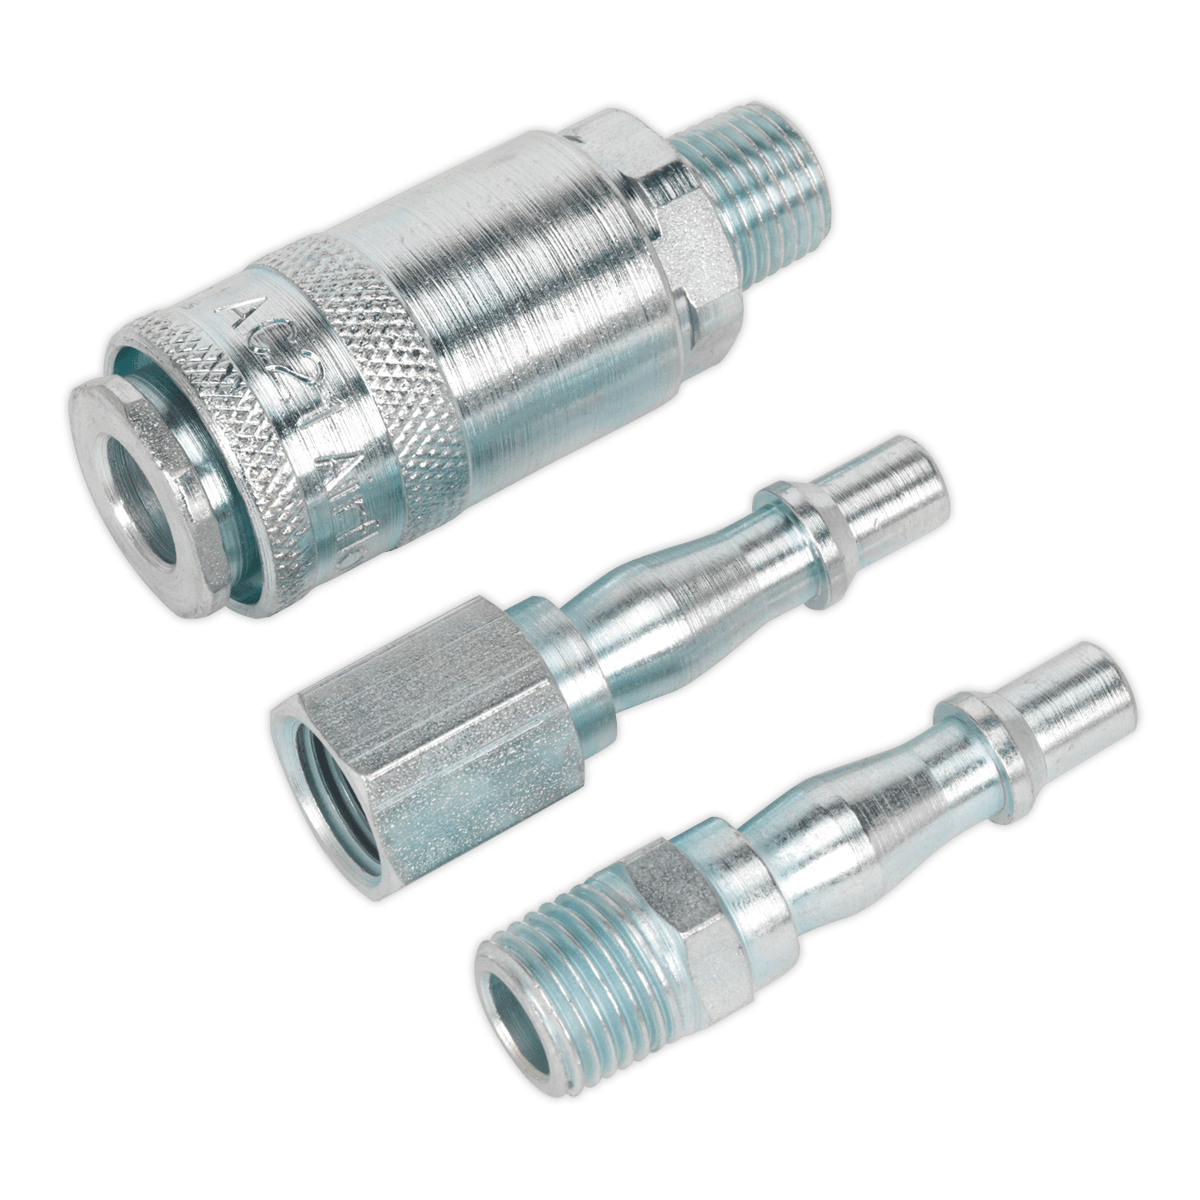 Air Tool Coupling Kit 3pc 1/4"BSP | Kit comprising of male threaded coupling body together with male and female threaded adaptors. | toolforce.ie